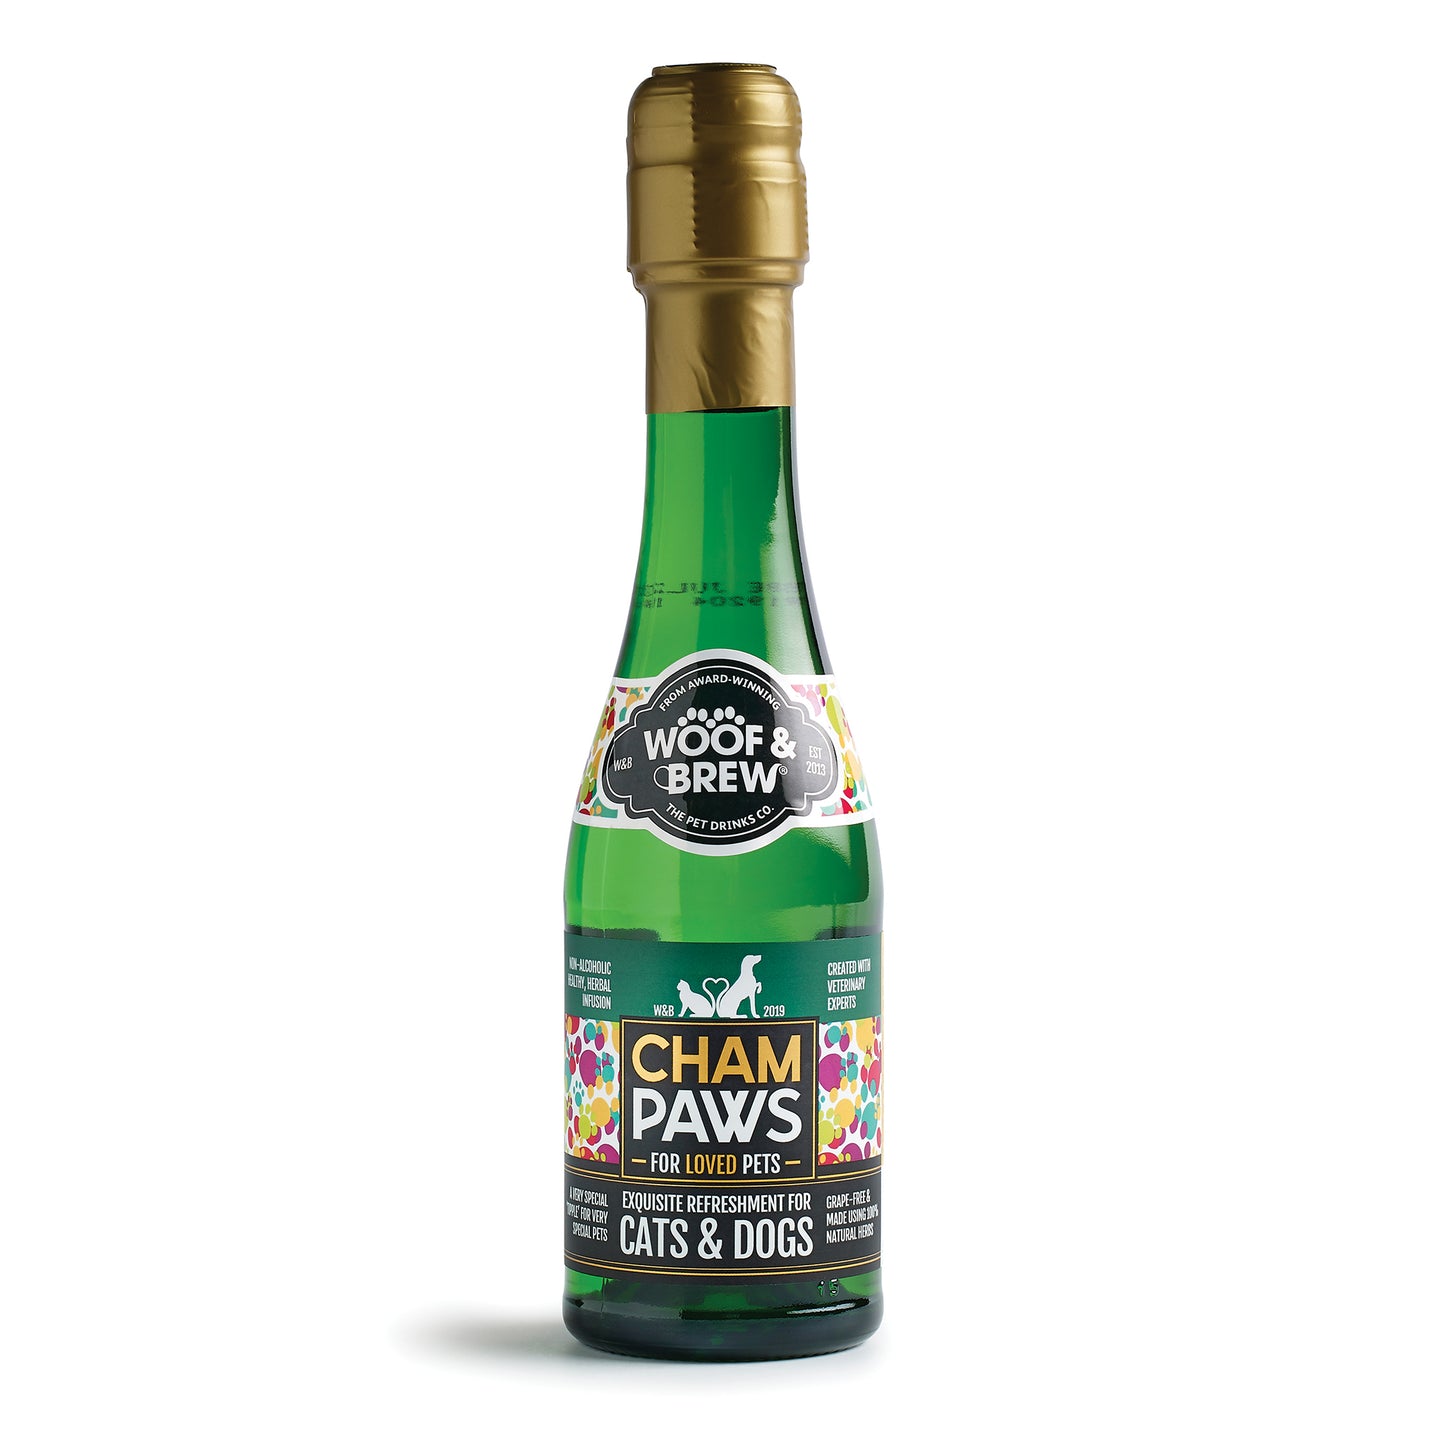 Chaw:Paws Champagne For Dogs & Cats